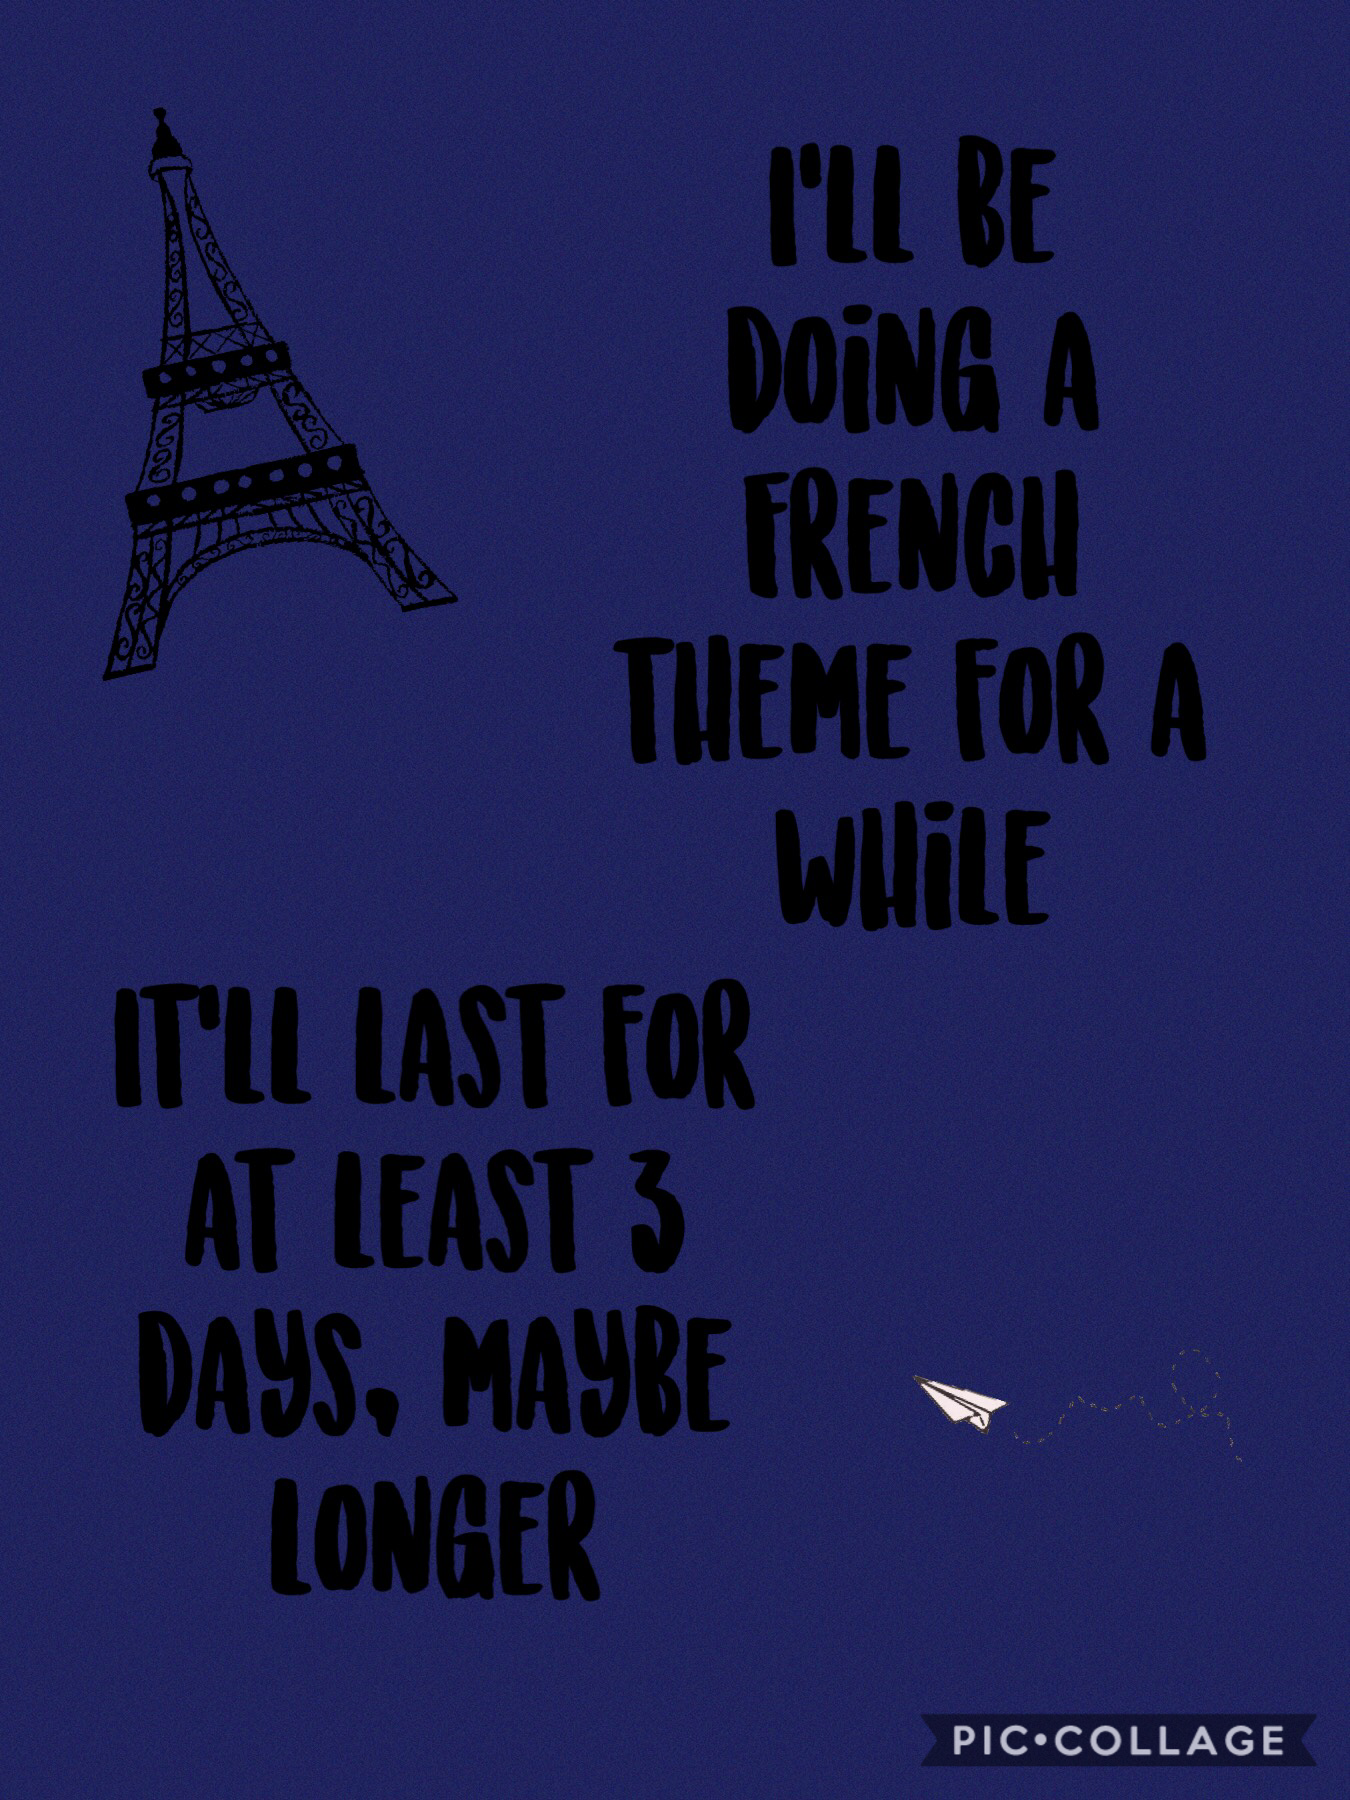 Tap for additional info
You can remix your own French themed one on any of my posts with this theme, and I’ll choose 1 winner. The first to like each post will get access to a png pack that I made. Any new followers get a spam!